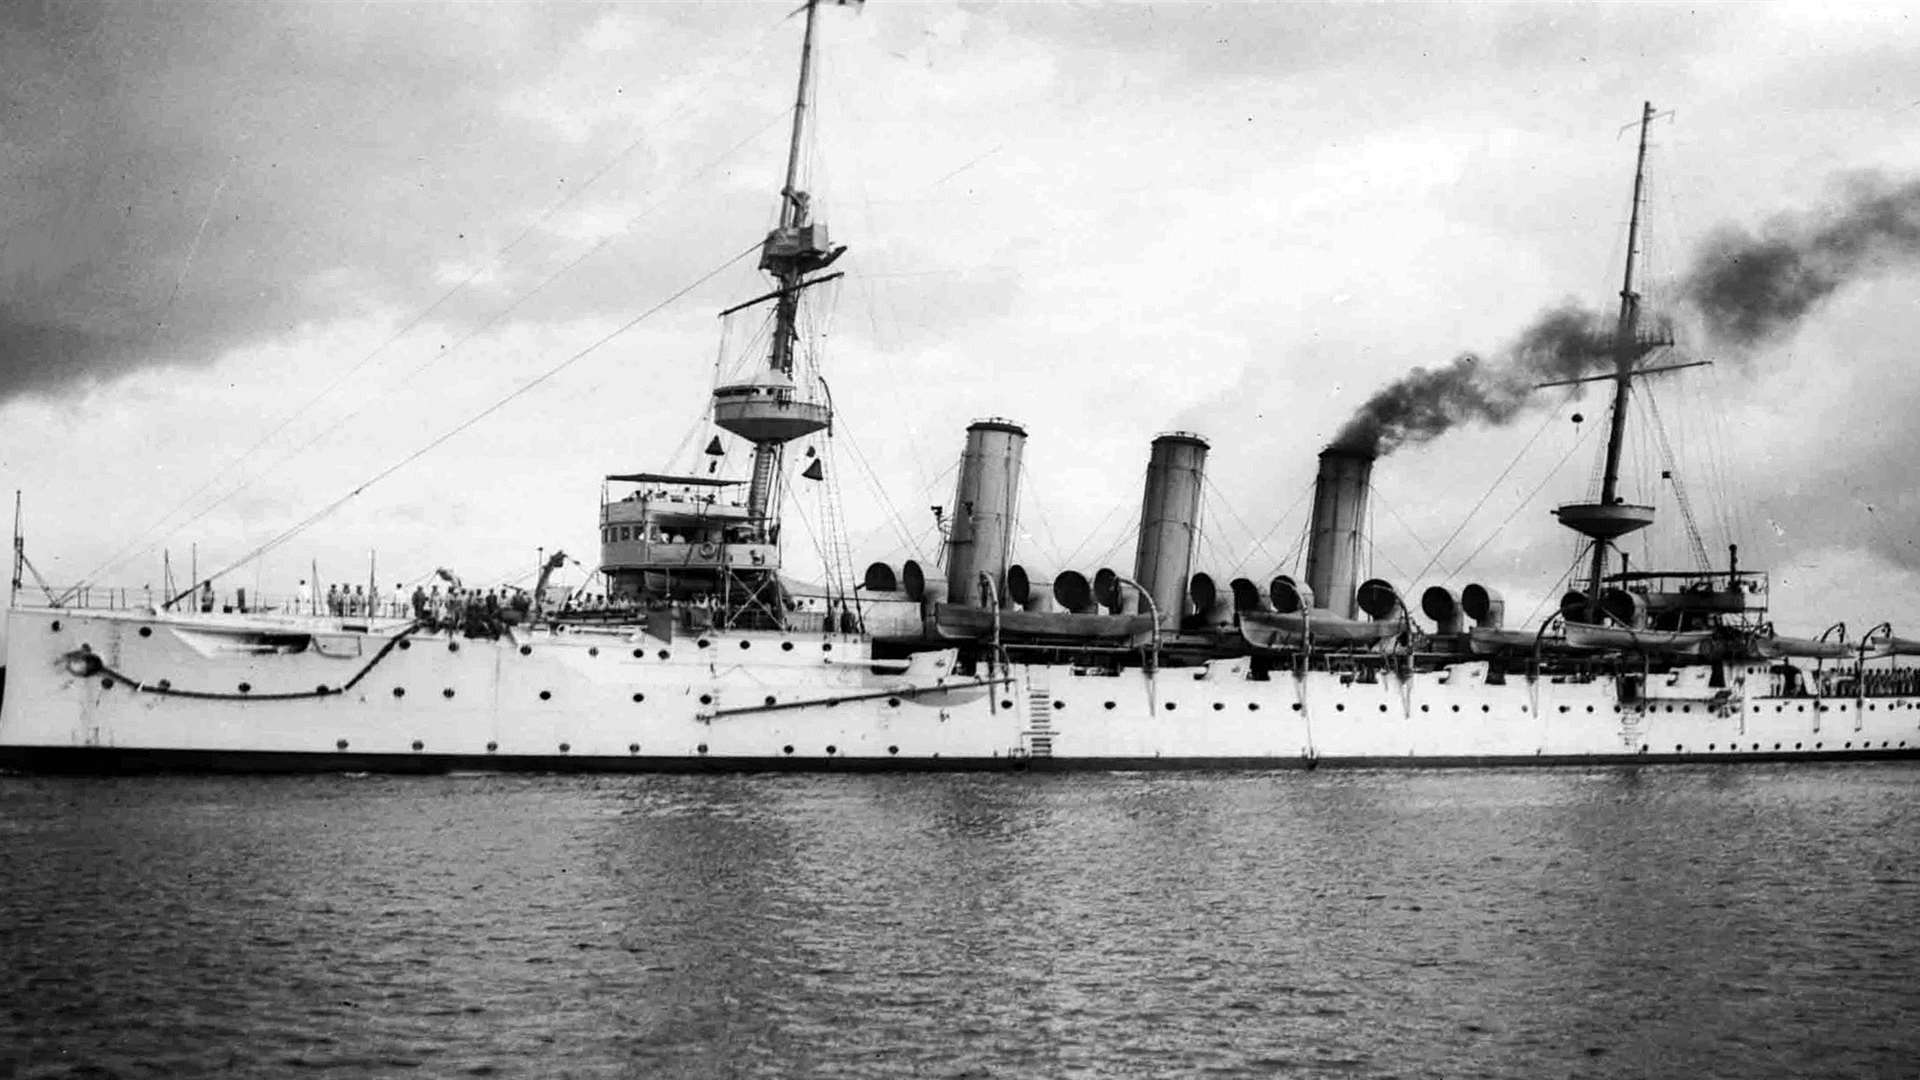 Two people have been arrested after thefts from the shipwreck of HMS Hermes.